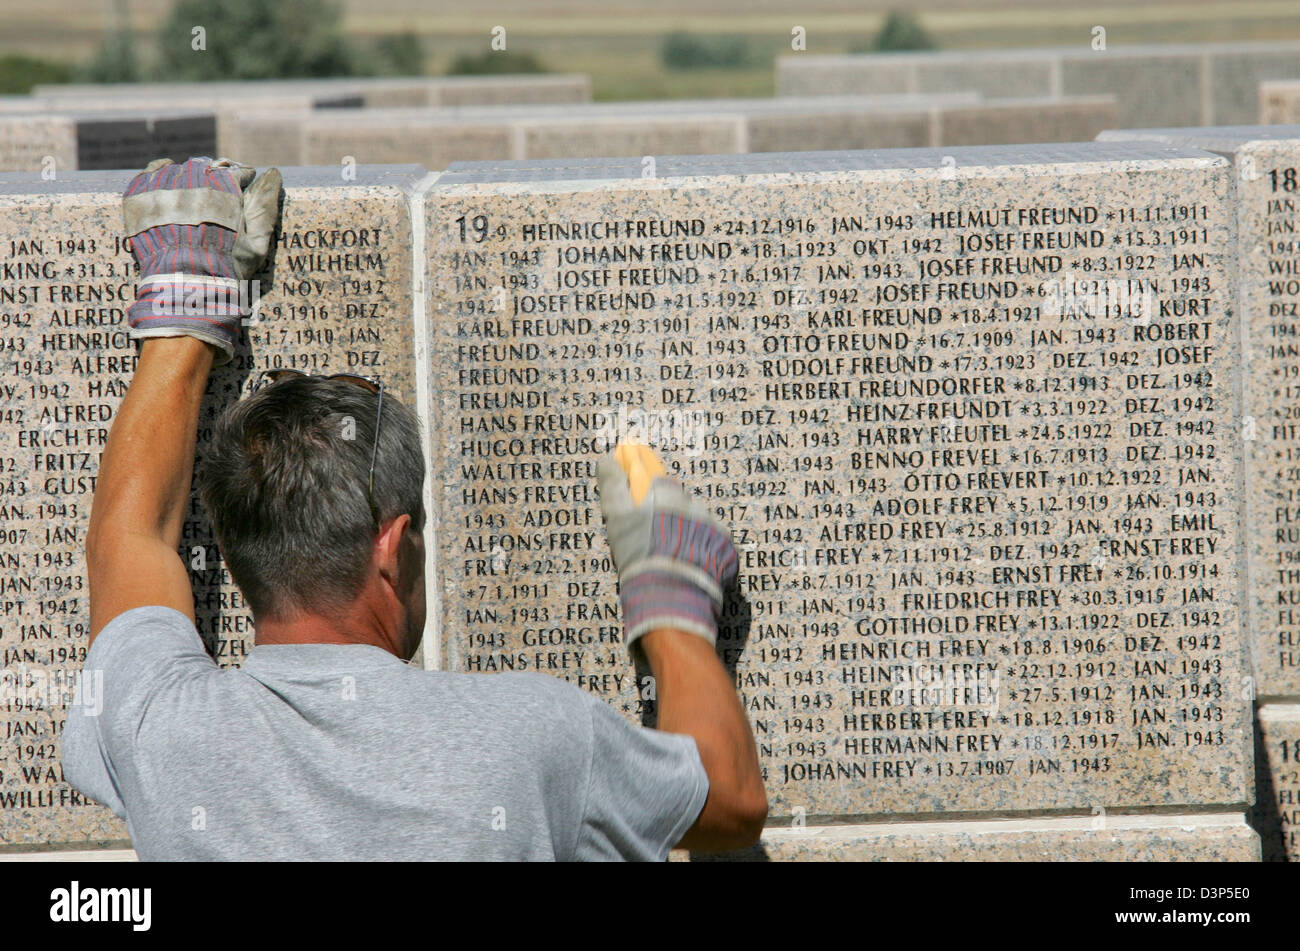 Valery Ilin cleans a granitic cube reading the names of the German WWII soldiers missing in action at the military cemetary Rossoshka near Volgograd, Russia, Friday, 08 September 2006. The names of more than 100,000 WWII soldiers missing in action since the Battle of Stalingrad are engraved to the 107 granitic cubes. The memorial place constructed by the German war graves agency 'V Stock Photo